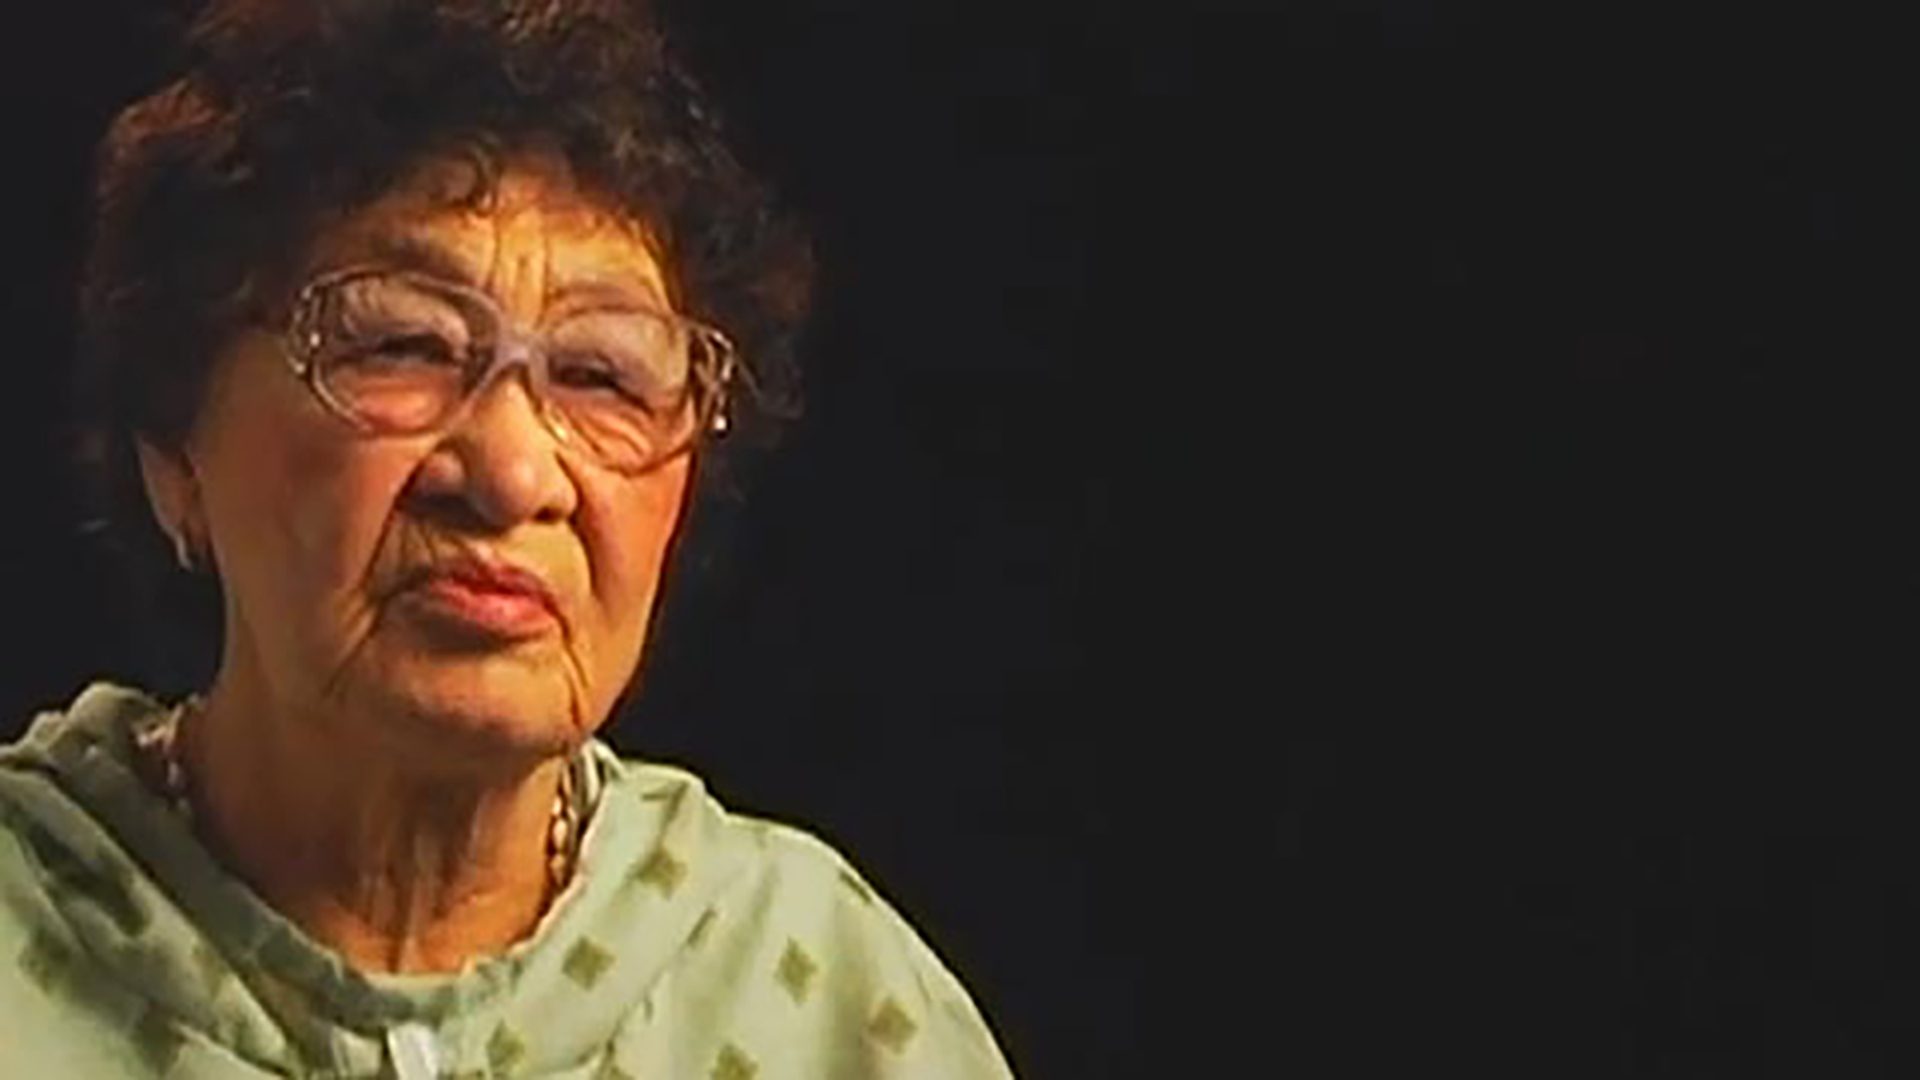 A senior woman with dark curly hair, glasses, and green patterned clothing is interviewed against a black background.